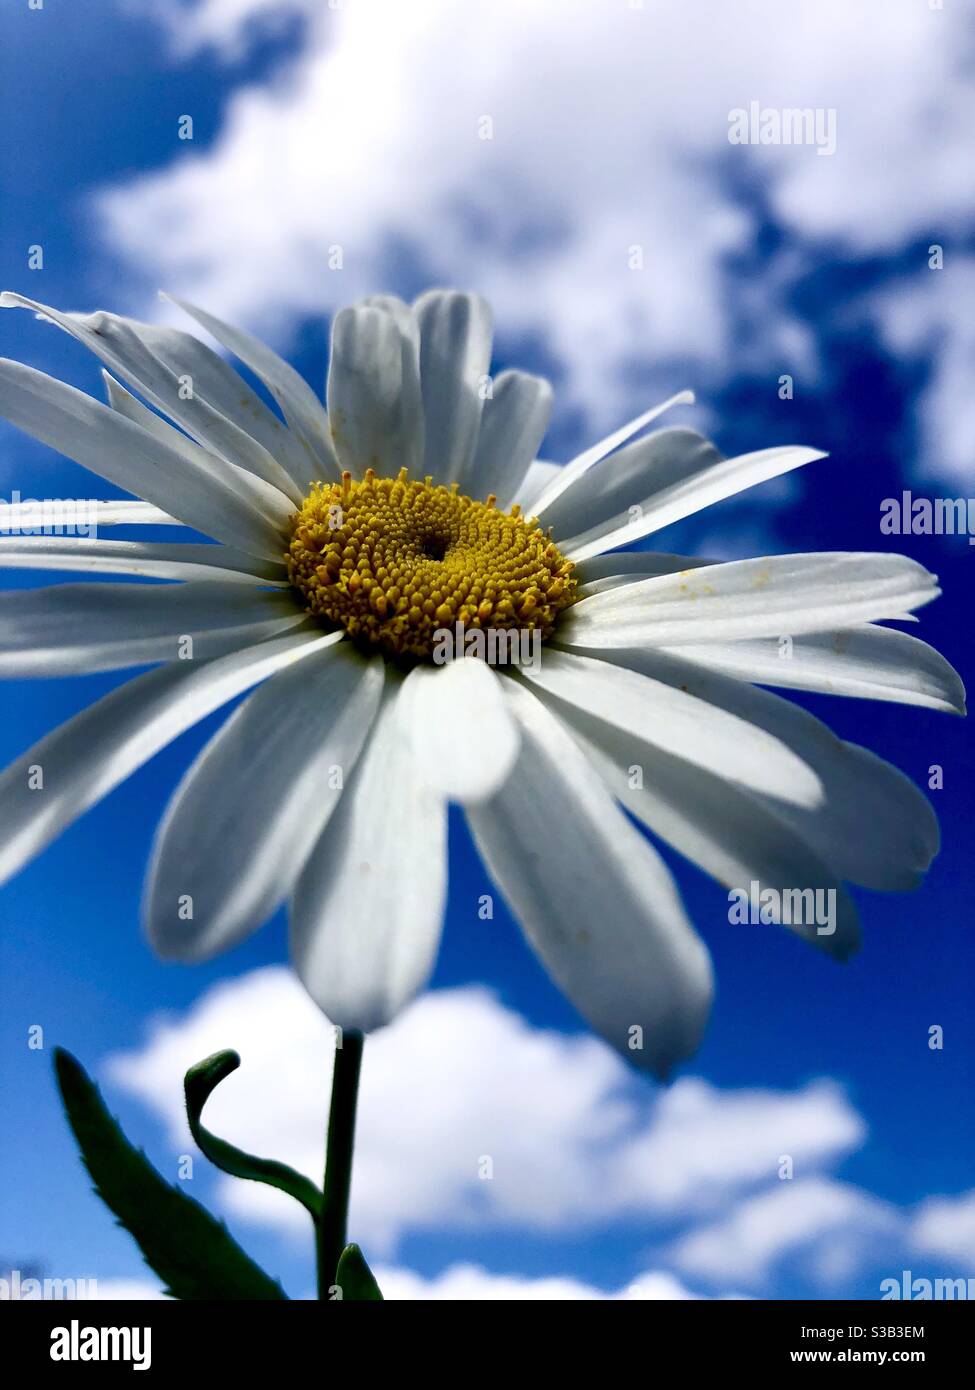 Daisy against a blue sky with clouds Stock Photo